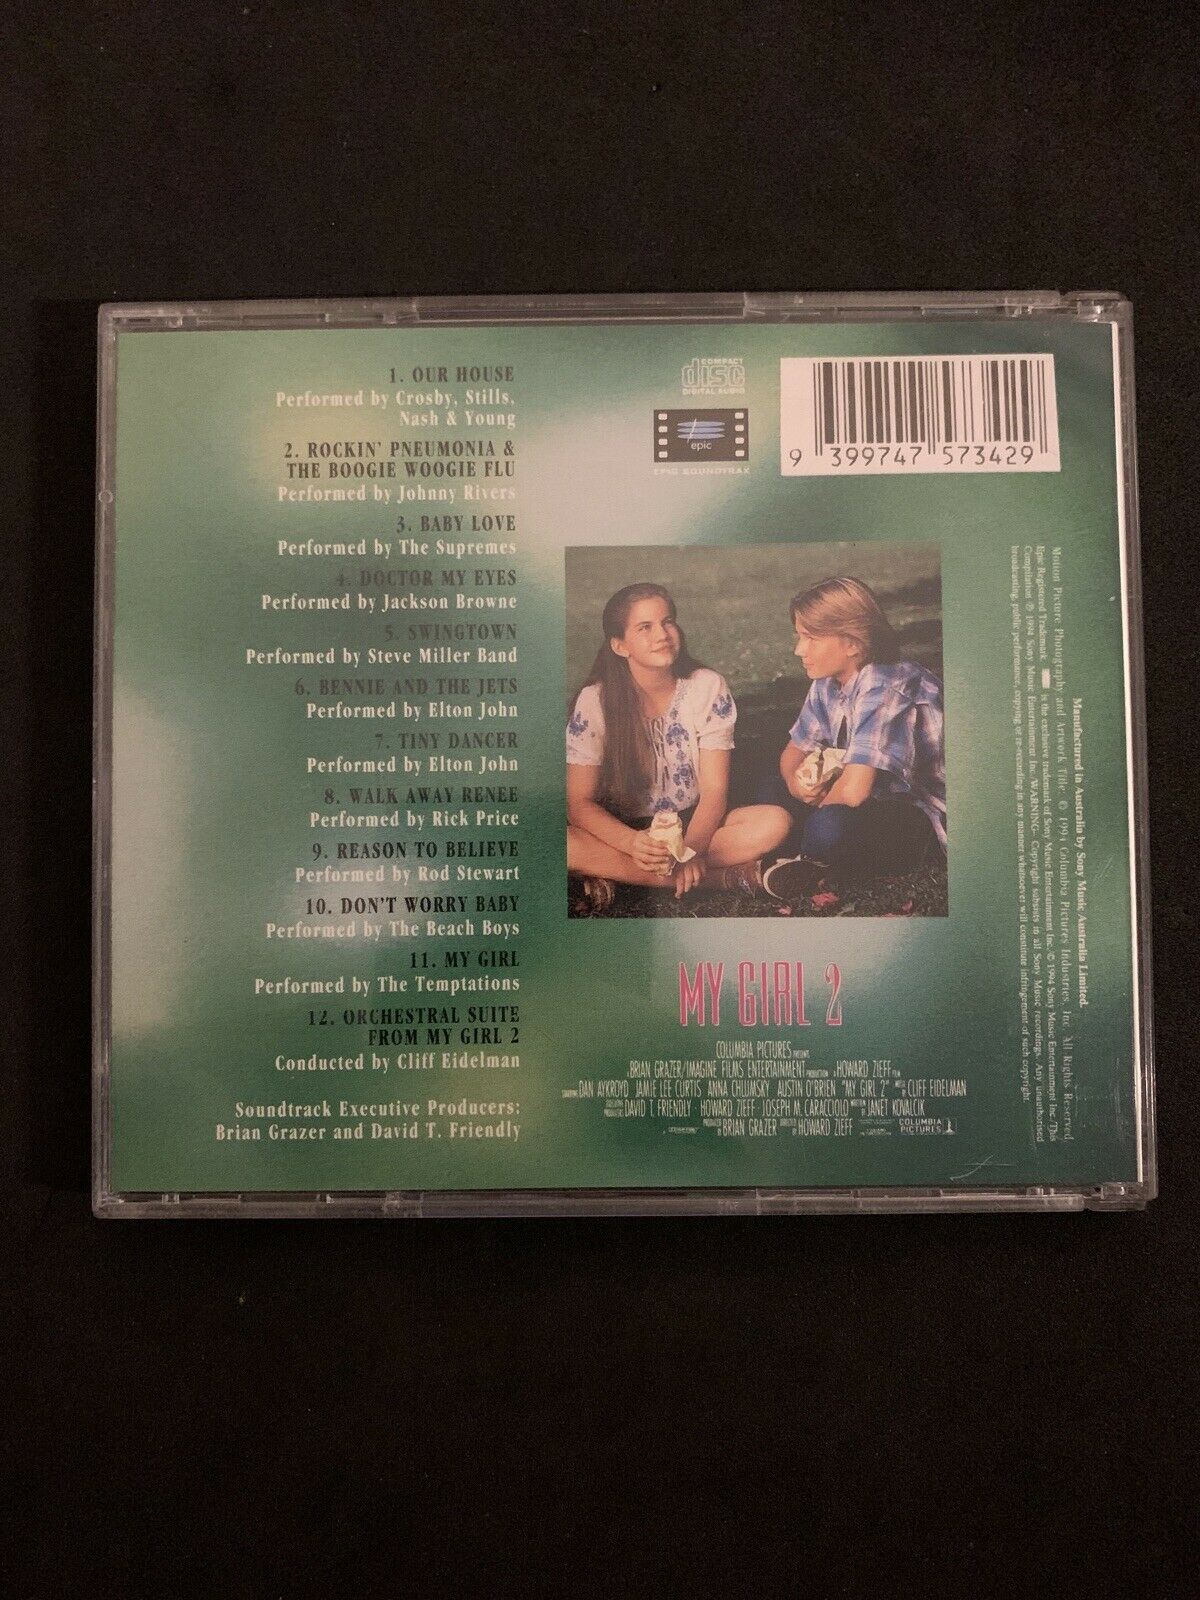 My Girl 2 - Original Motion Picture Soundtrack CD 1994